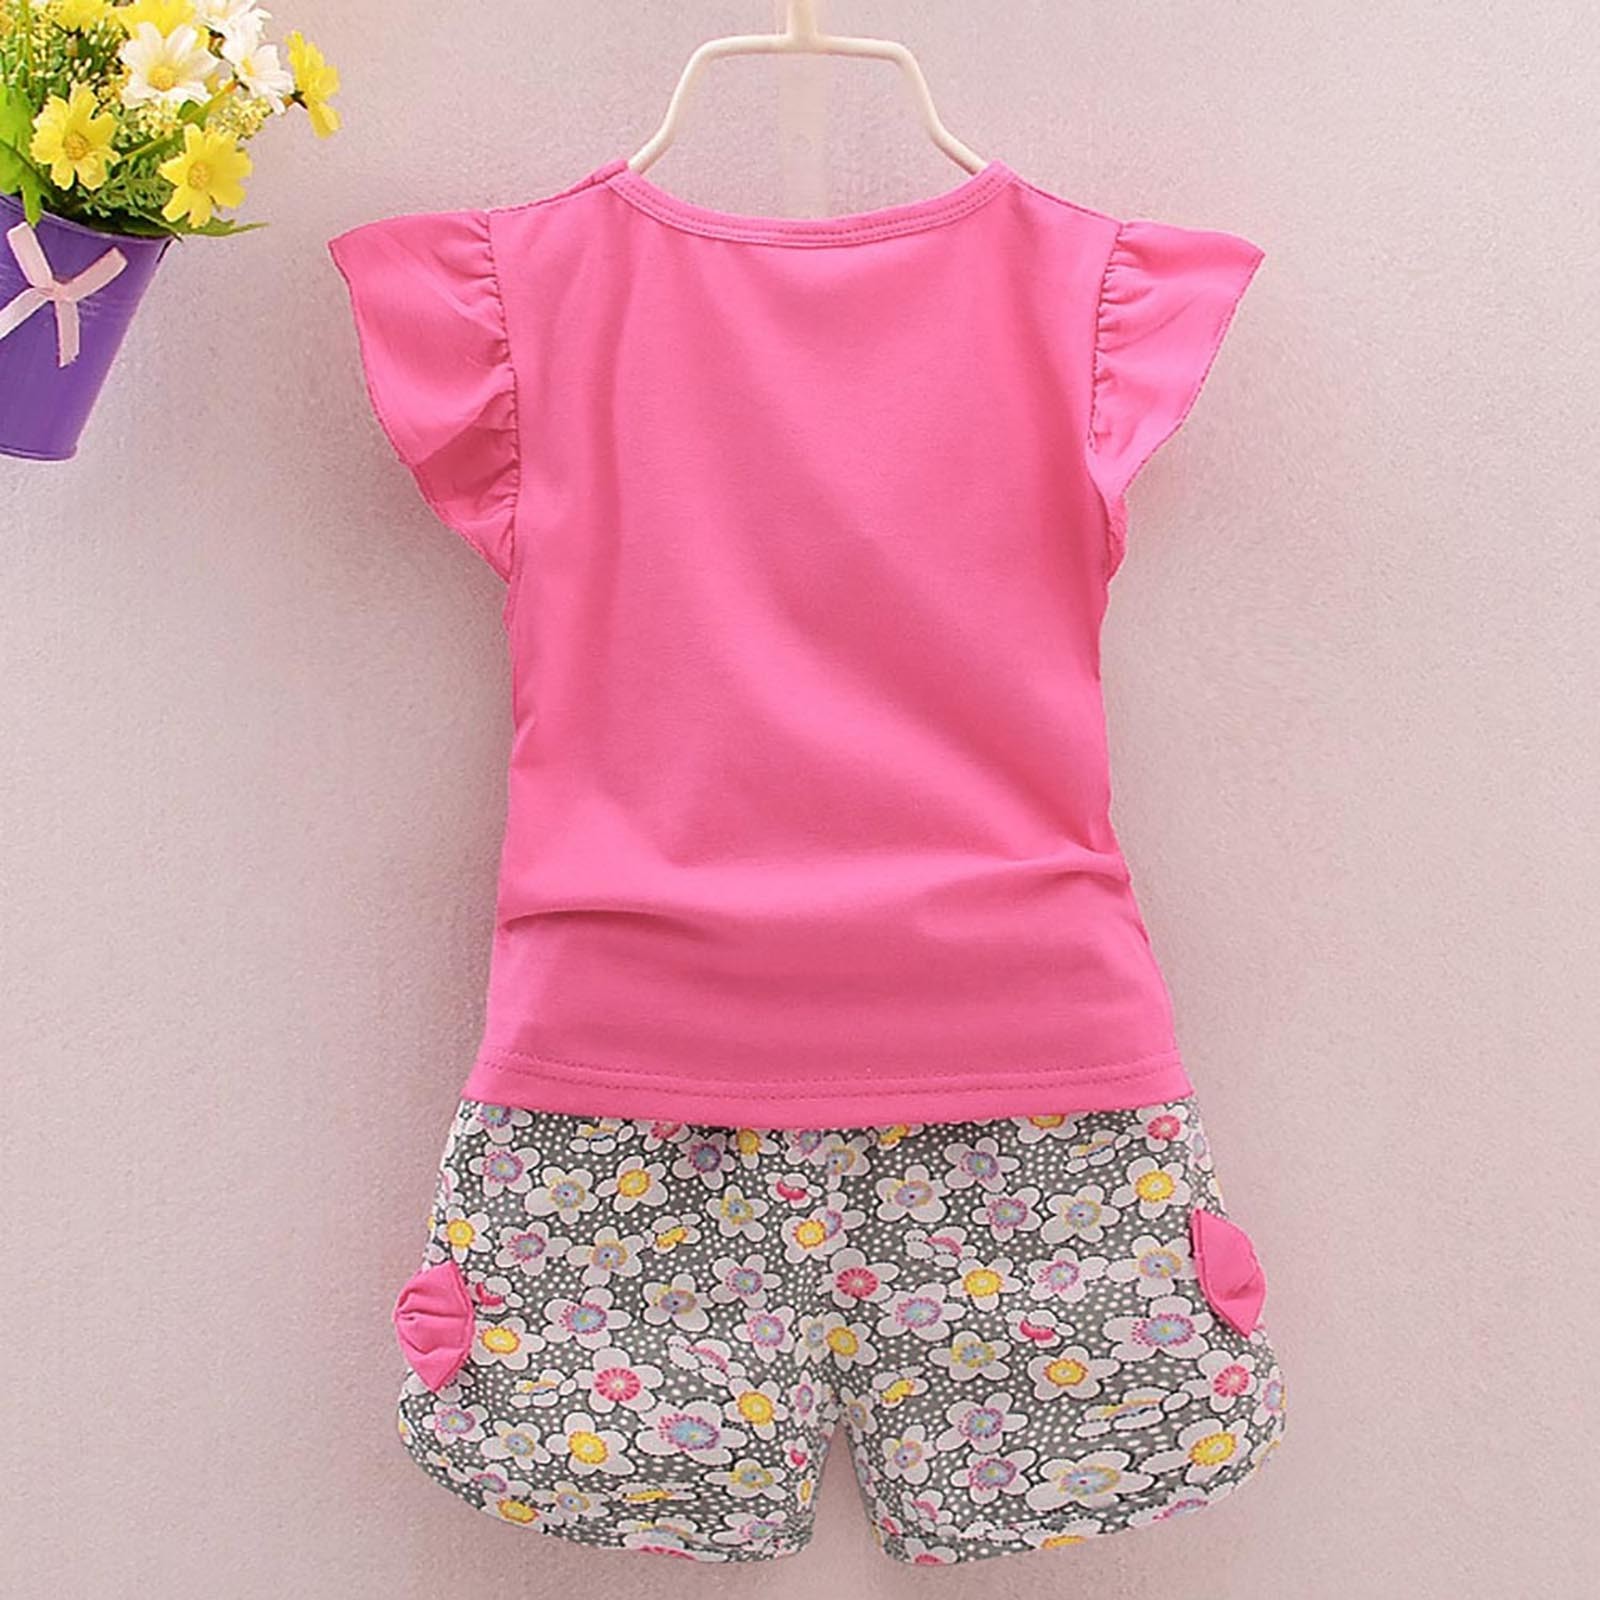 ZHAGHMIN Outfits For Kids T-Shirt Lolly Girls 2Pcs Pants Toddler Outfits Set Baby Clothes Kids Tops+Short Girls Outfits&Set Baby Wrap For Girls 8 Girls Outfits Baby Blankets For Girls Size Small Gir - image 3 of 9